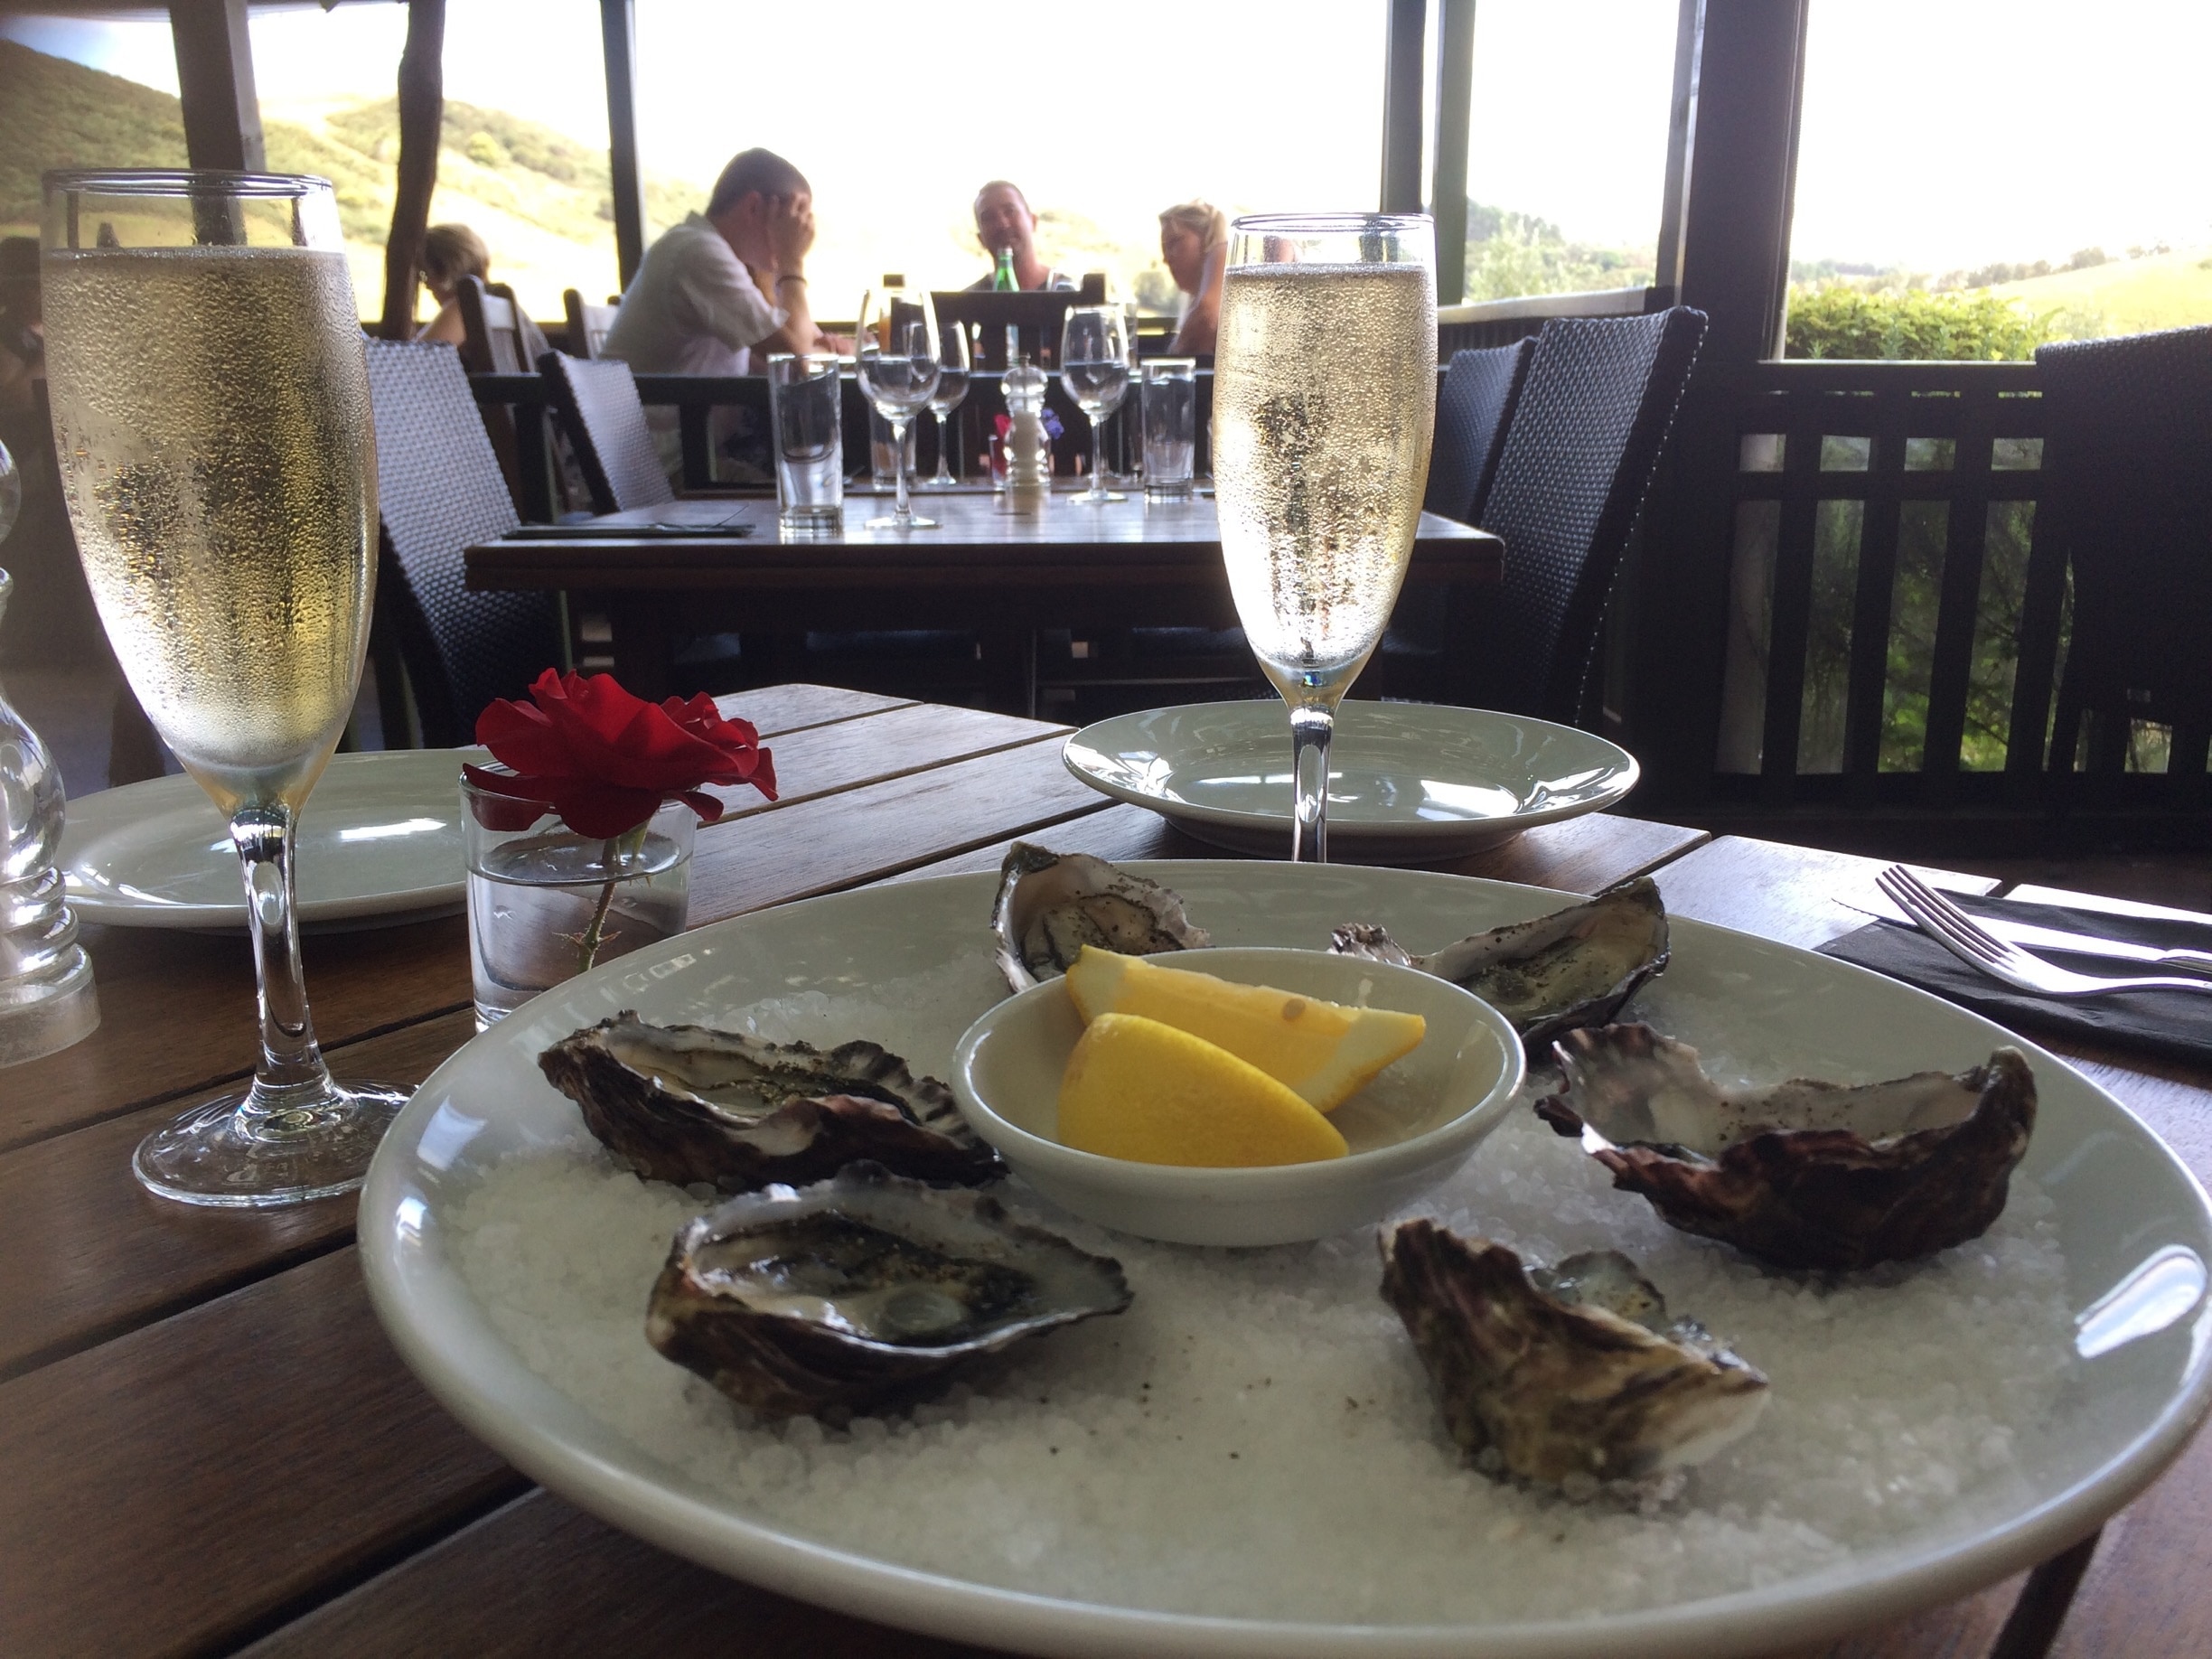 Oysters & champagne.... Because it's Valentine's Day 💗